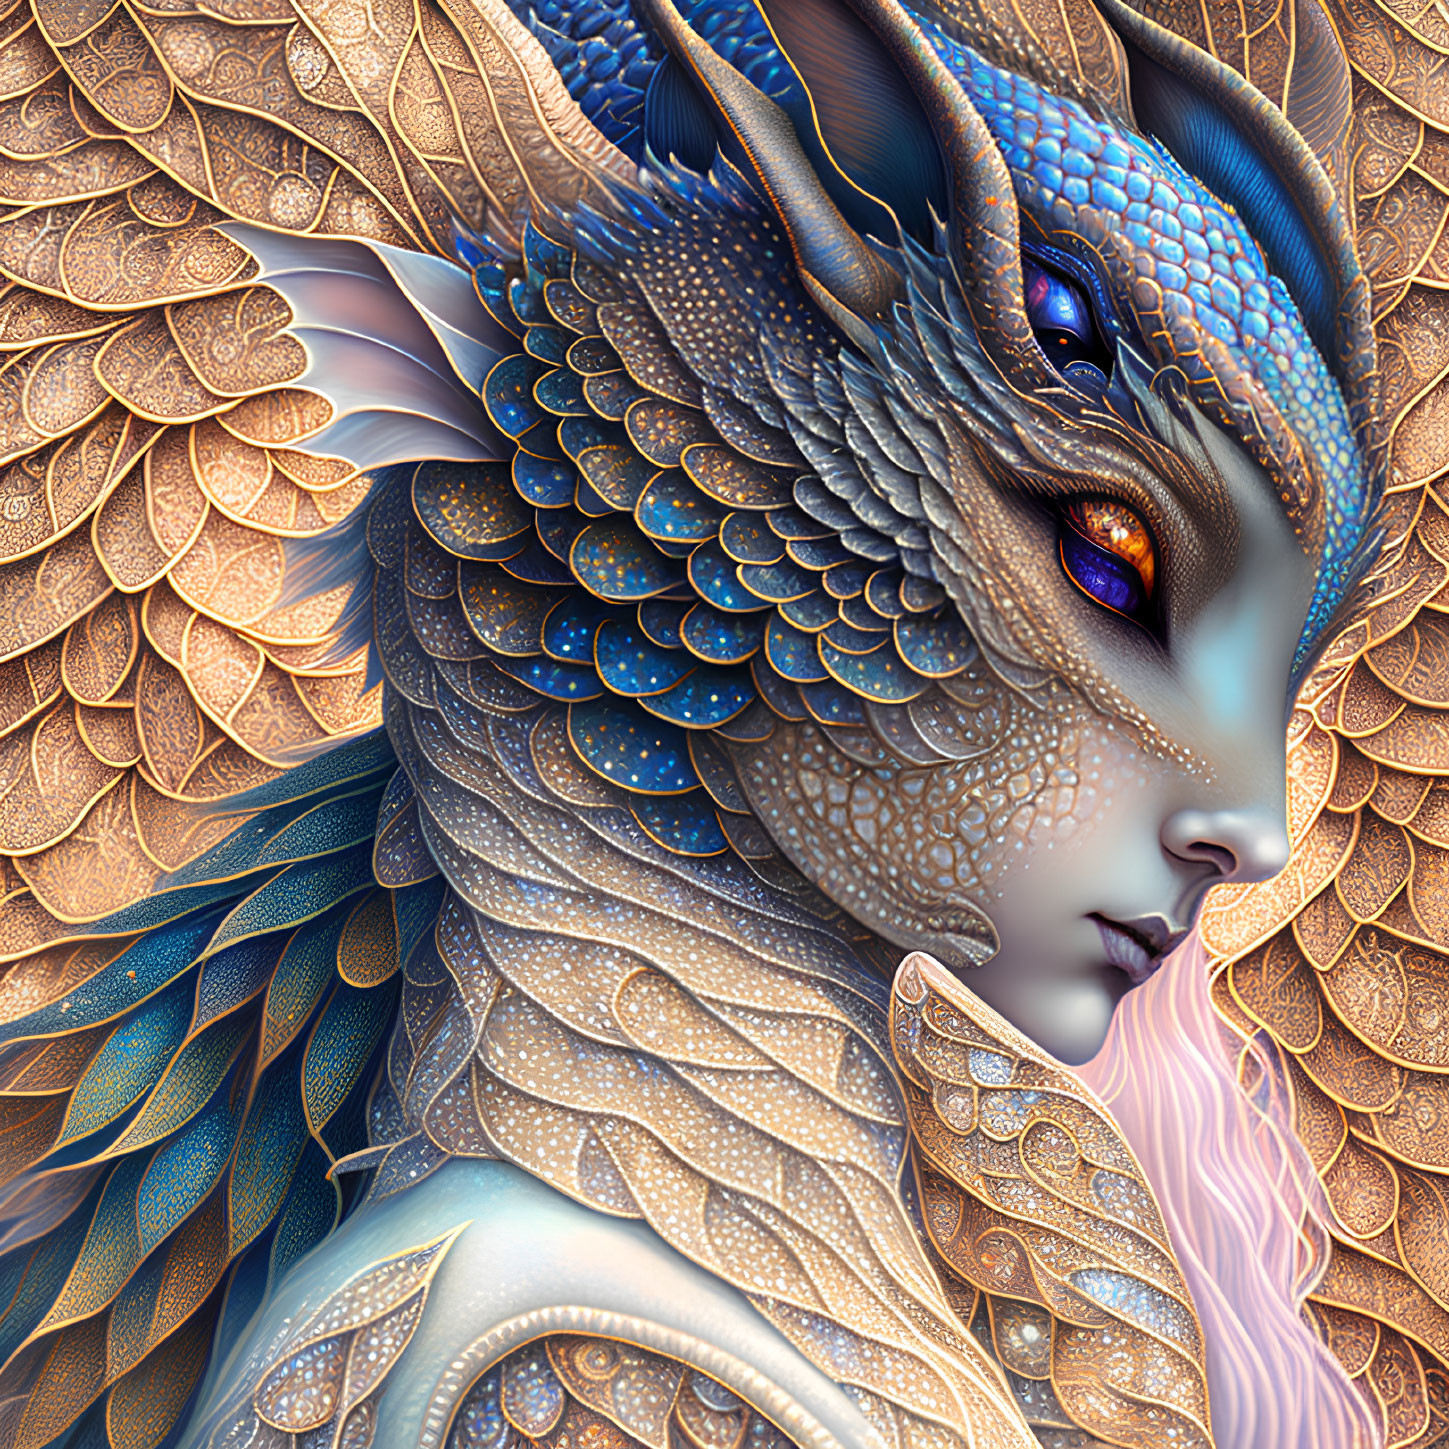 Fantastical humanoid creature with blue dragon scales and leafy wing-like ears